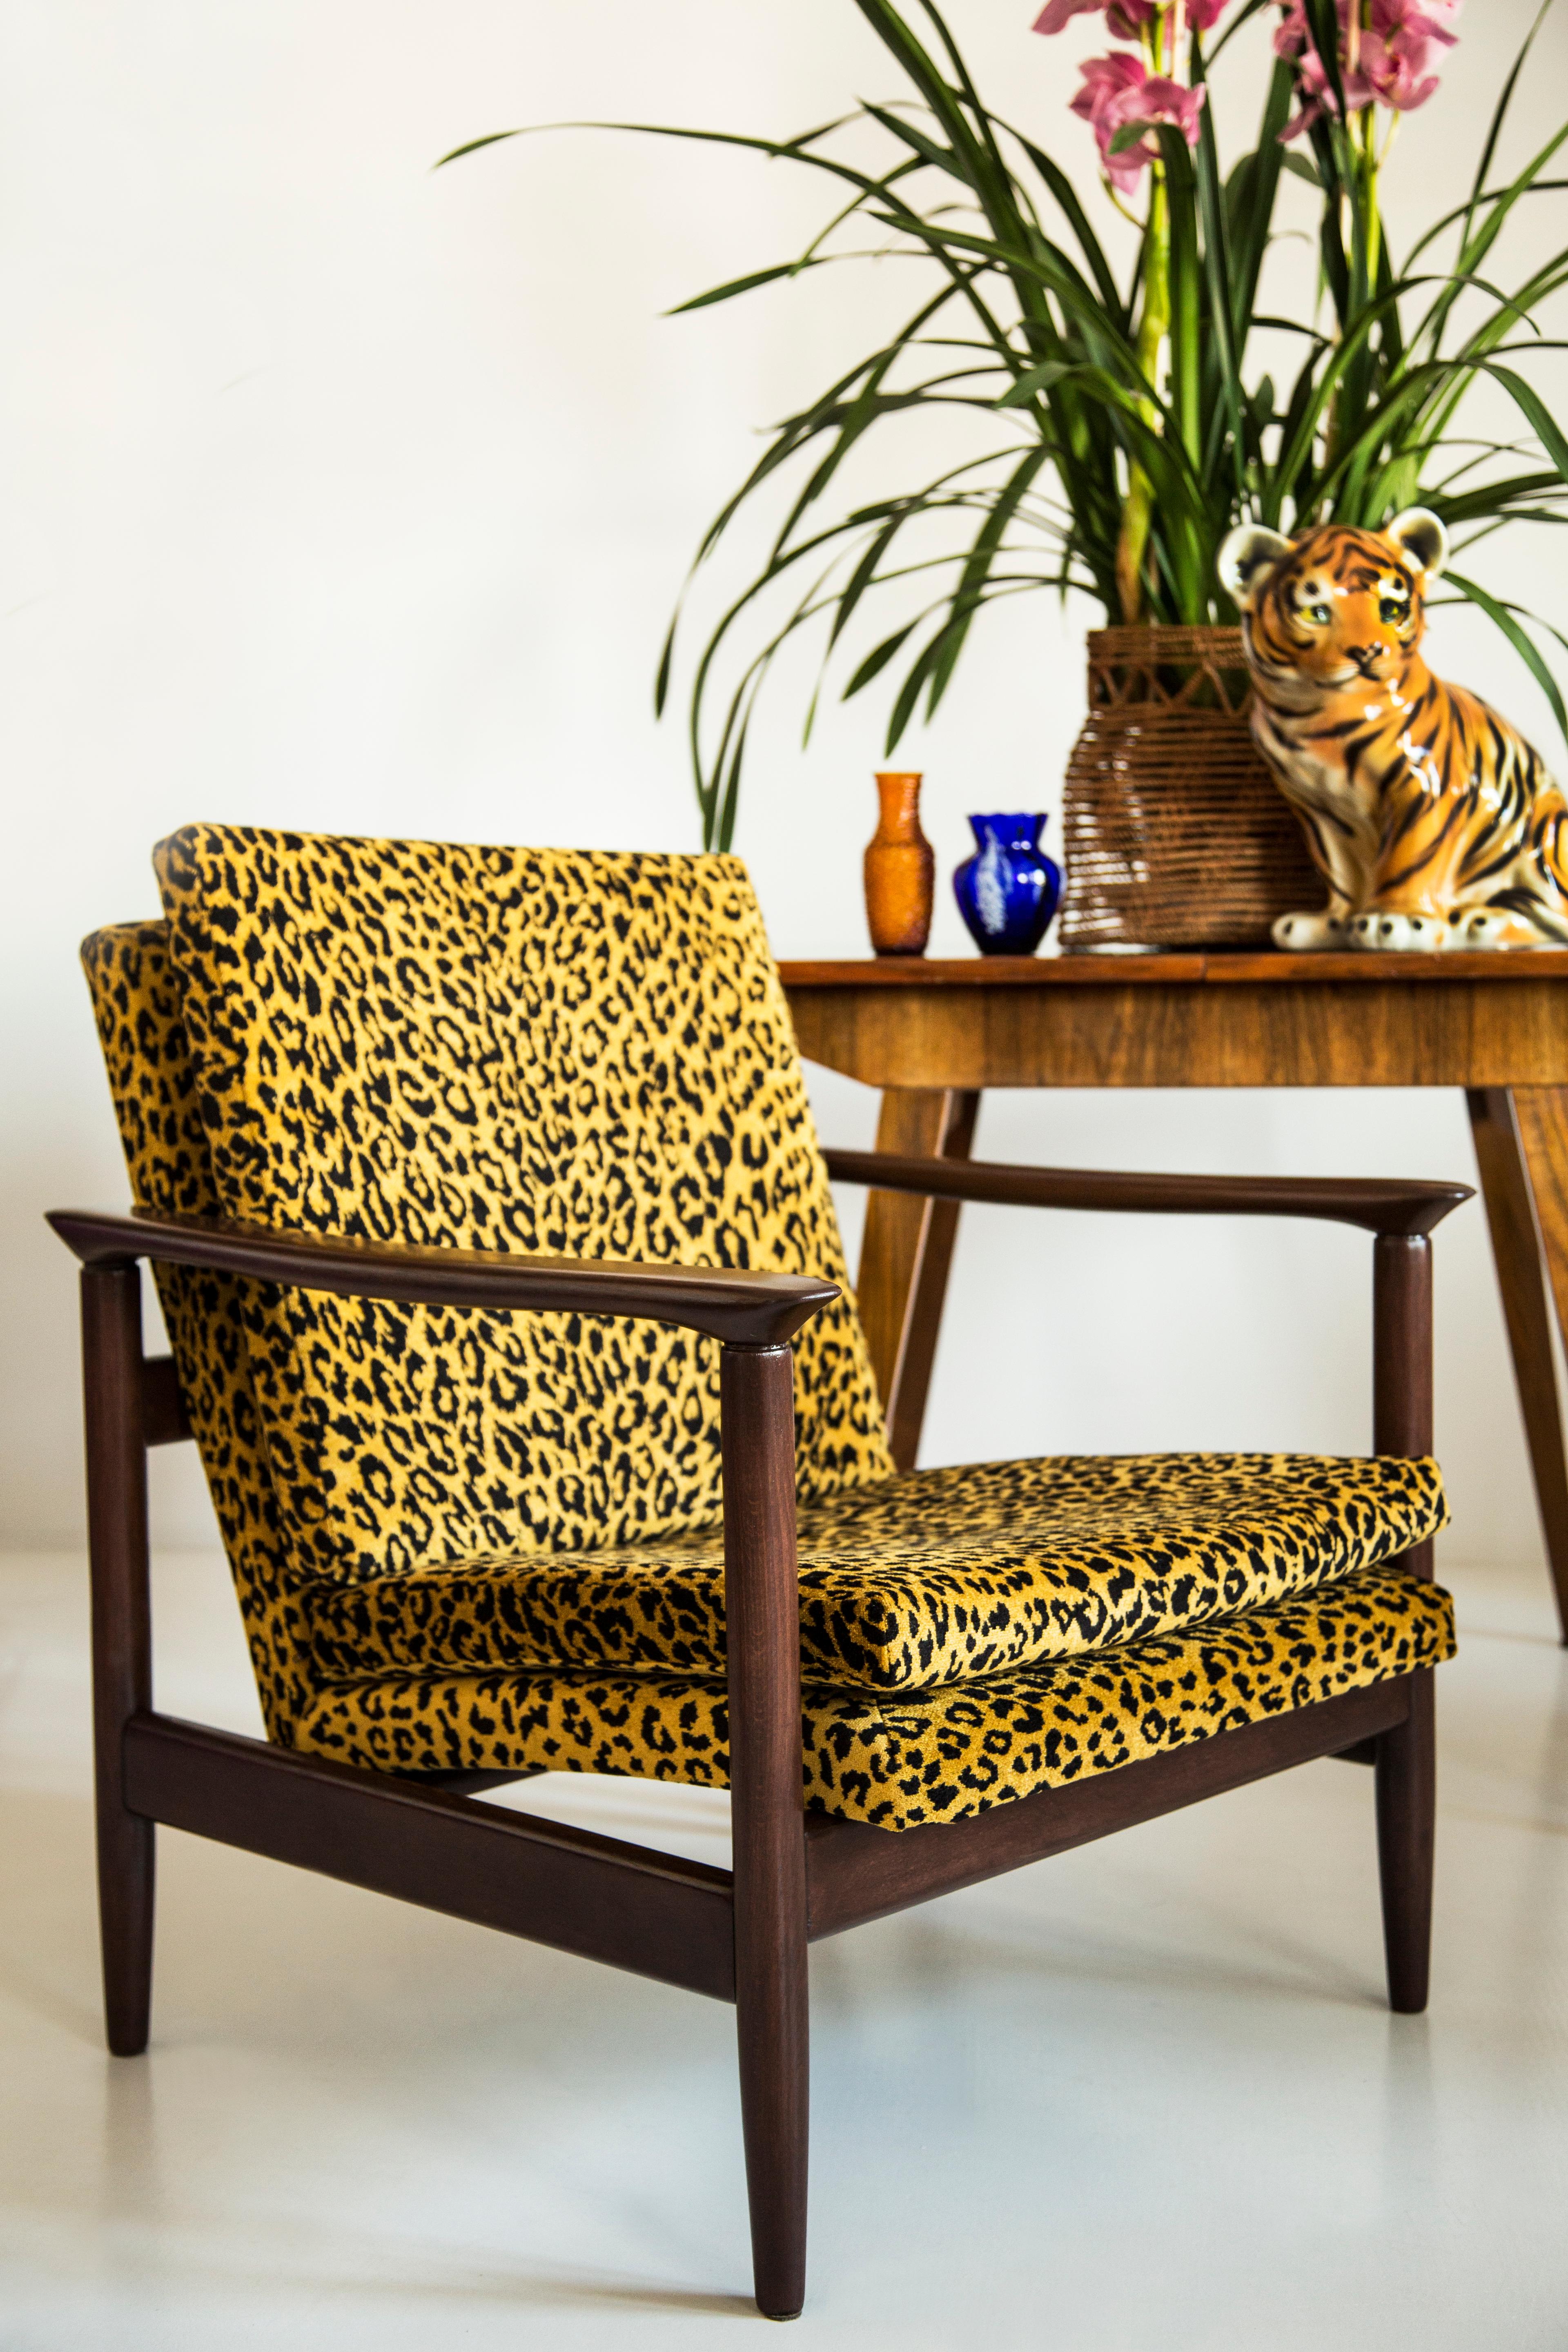 20th Century Pair of Midcentury Leopard Armchairs, GFM 142, Edmund Homa, Europe, 1960s For Sale